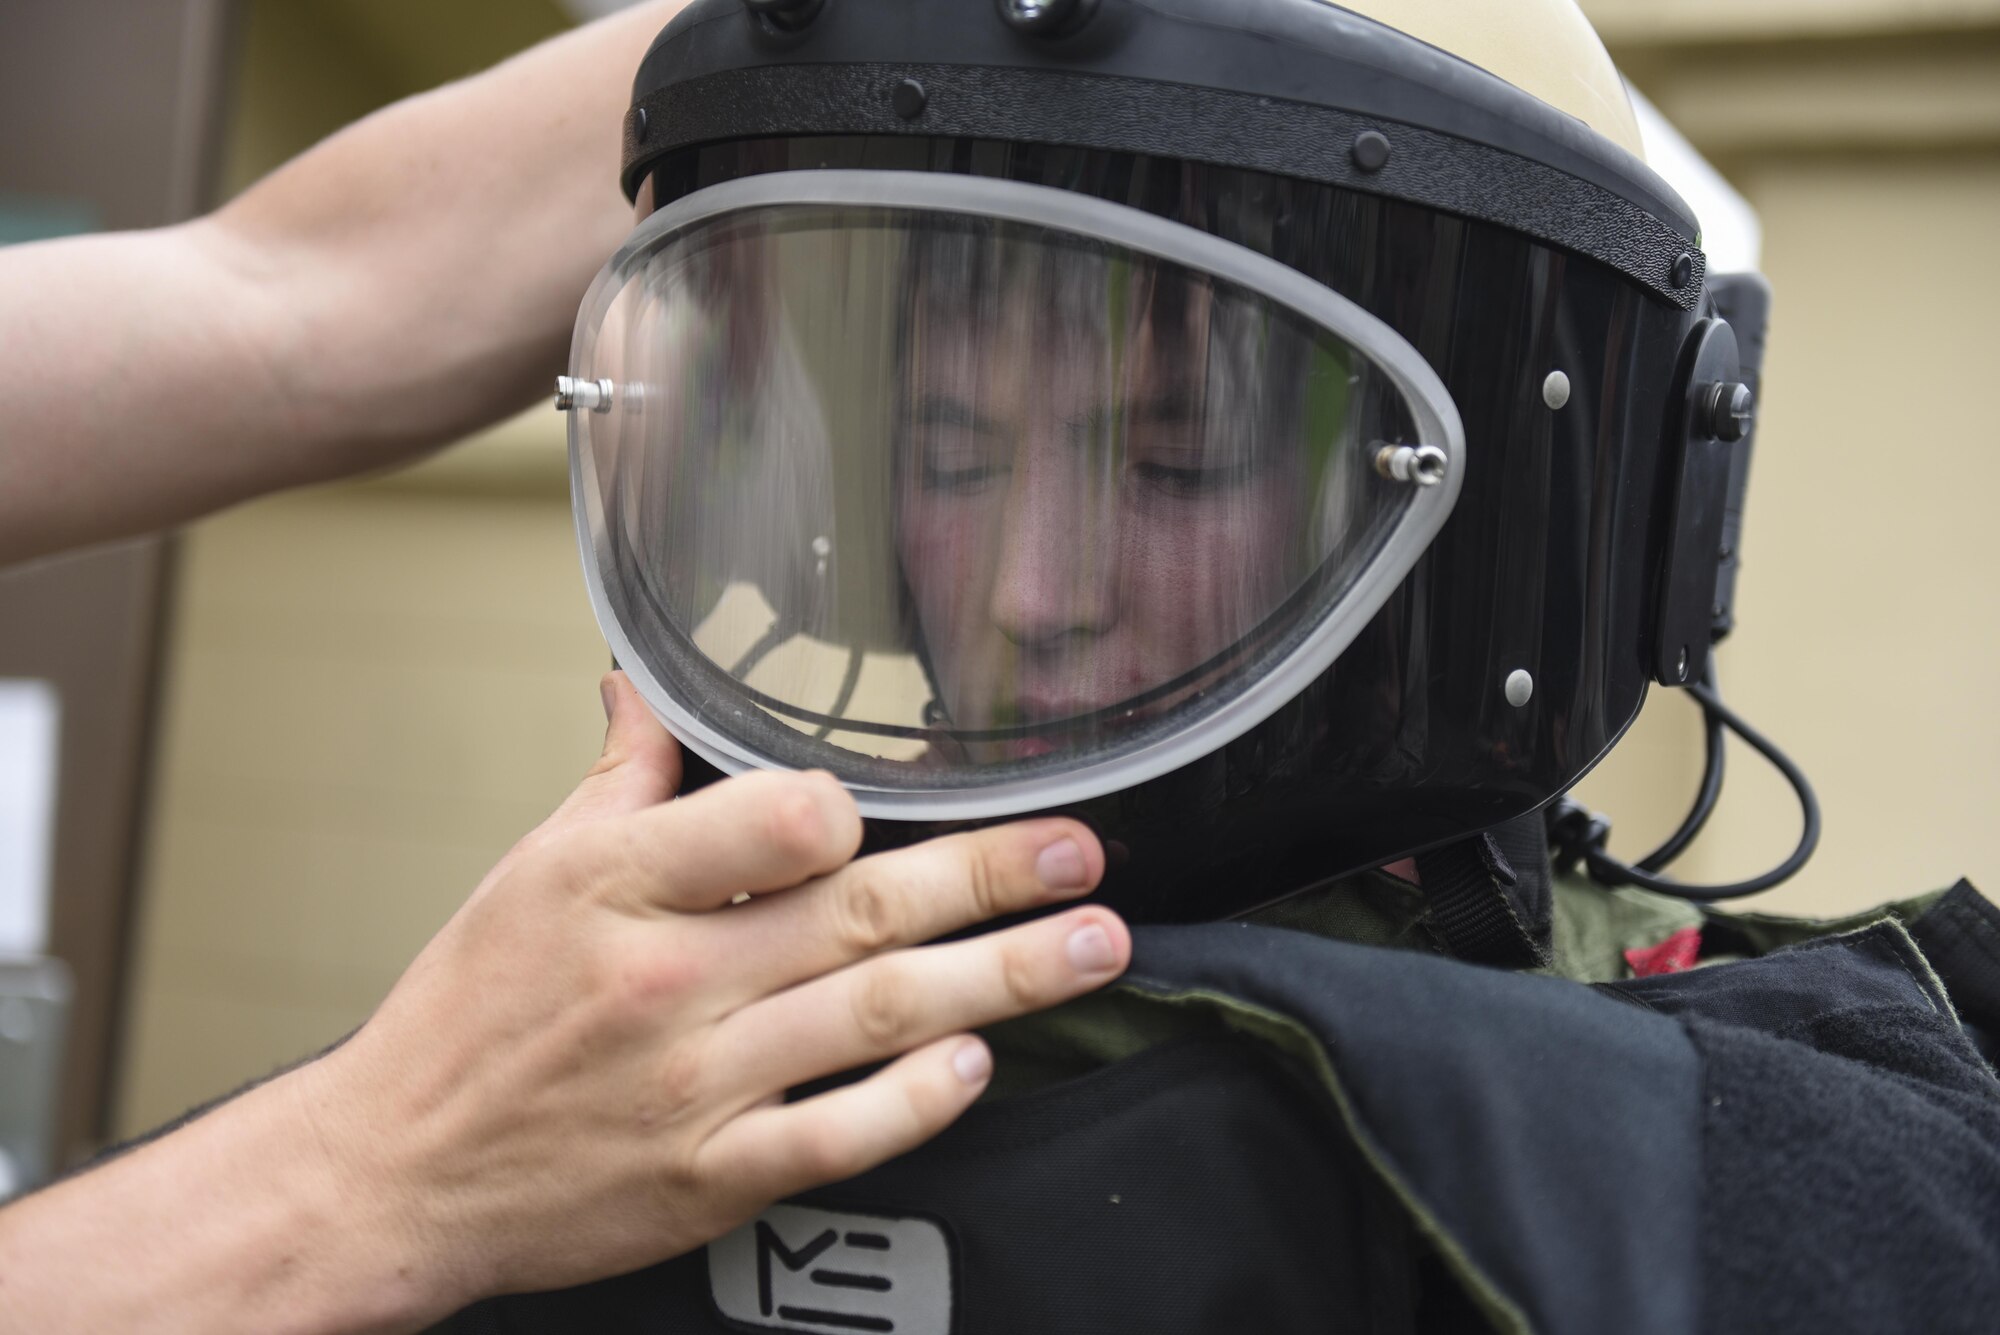 U.S. Air Force Academy Cadet 2nd Class Ryan Ramseyer tries on an explosive ordnance disposal suit at Kunsan Air Base, Republic of Korea, July 11, 2017. The visit allows cadets to travel different bases to learn about different careers and missions on the officer and enlisted tier and is a part of the Air Force Academy’s Operation Air Force program. (U.S. Air Force photo by Senior Airman Michael Hunsaker/Released)